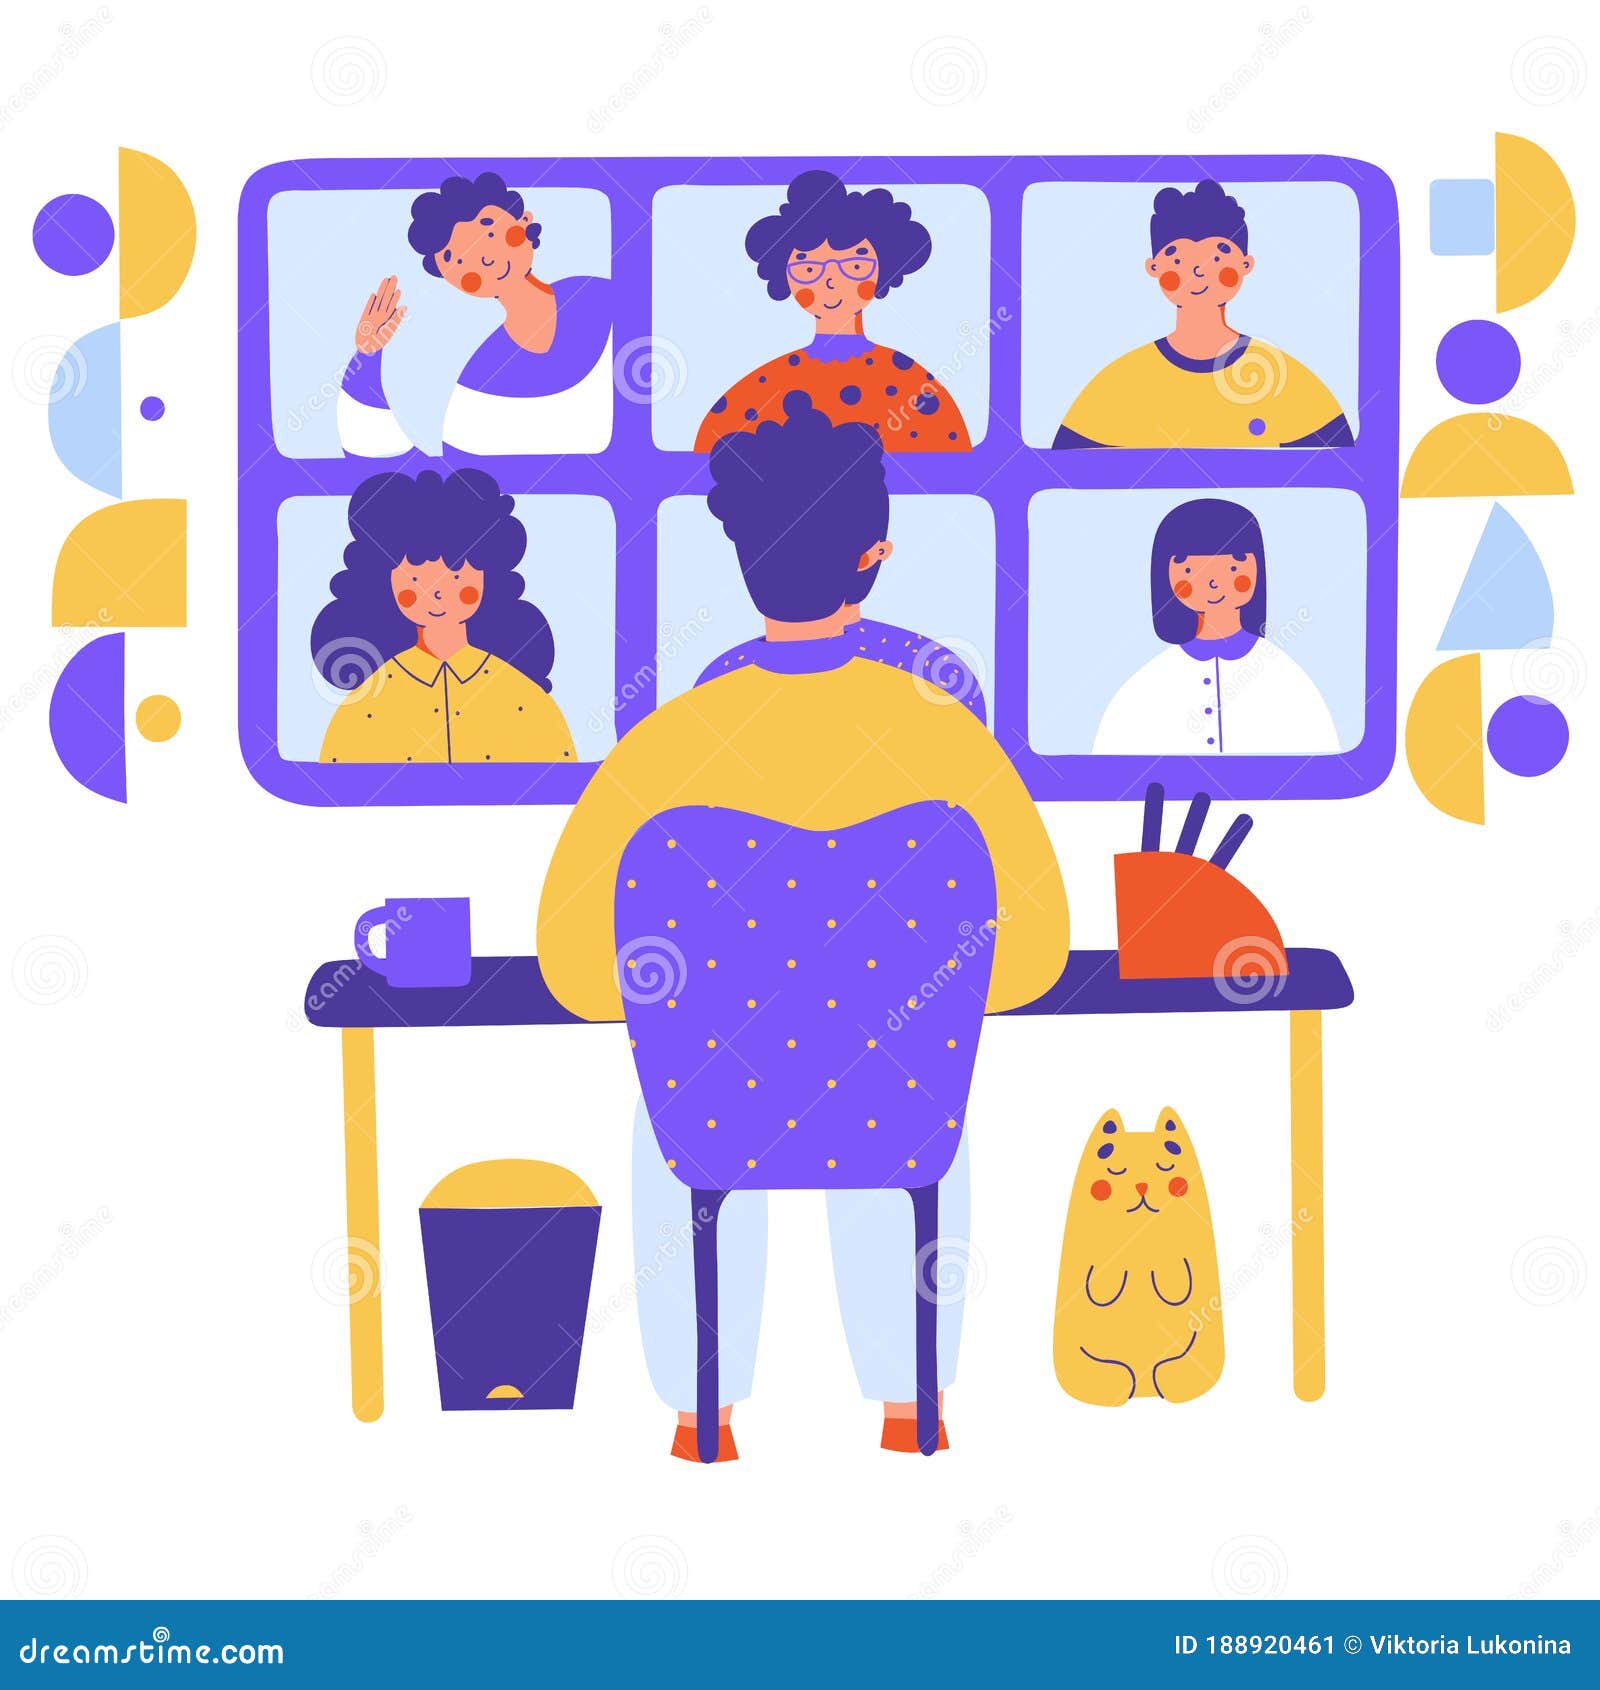 Working Video Chat, Flat Cartoon Vector Illustration. Business Conference  Stock Vector - Illustration of flat, communication: 188920461